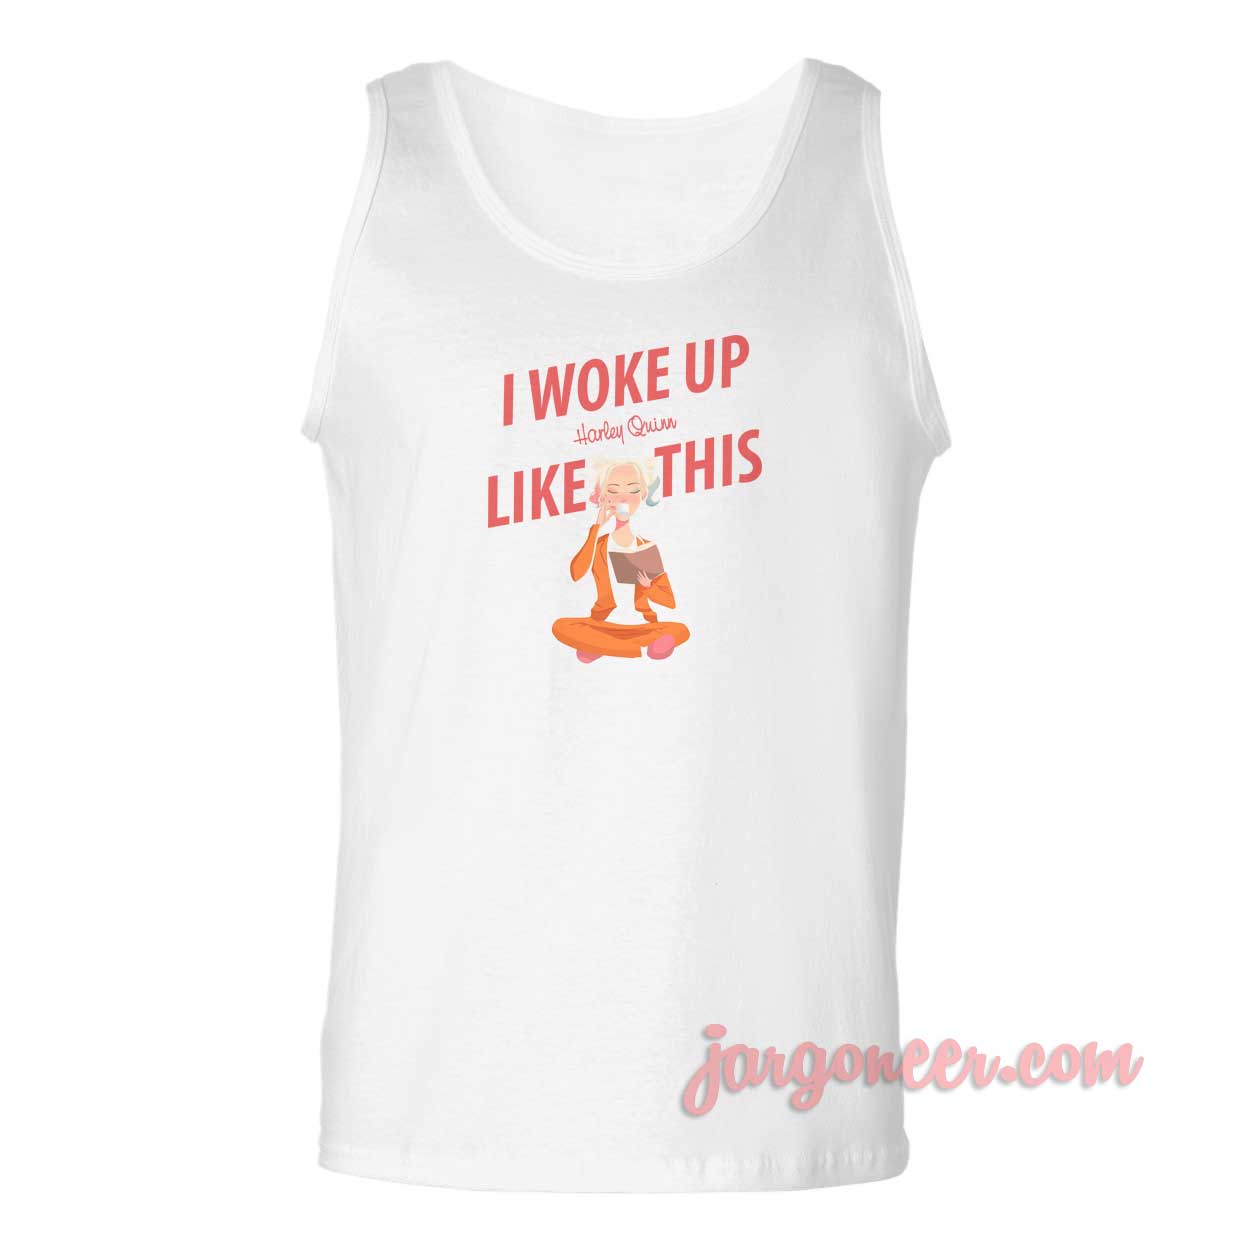 I Woke Up Like This Harley Quinn - Shop Unique Graphic Cool Shirt Designs